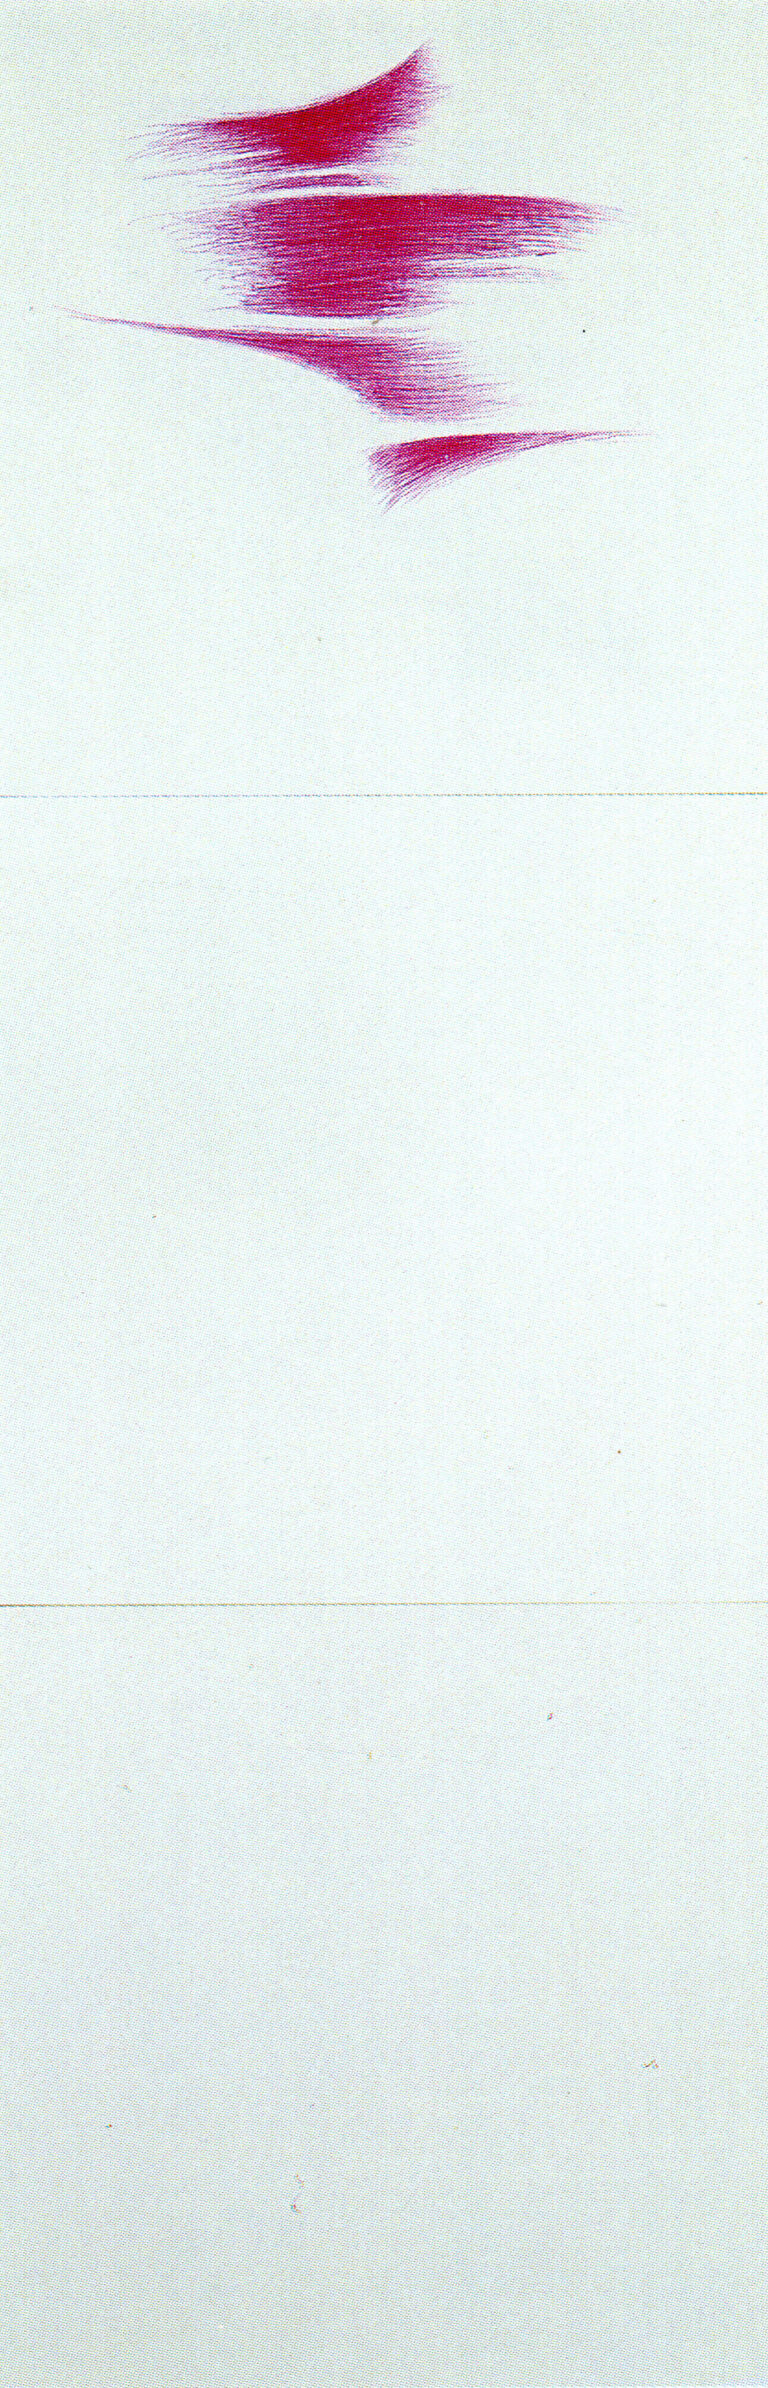 1989 - Ball-pen on canvas-backed paper - cm 103,5x34,5